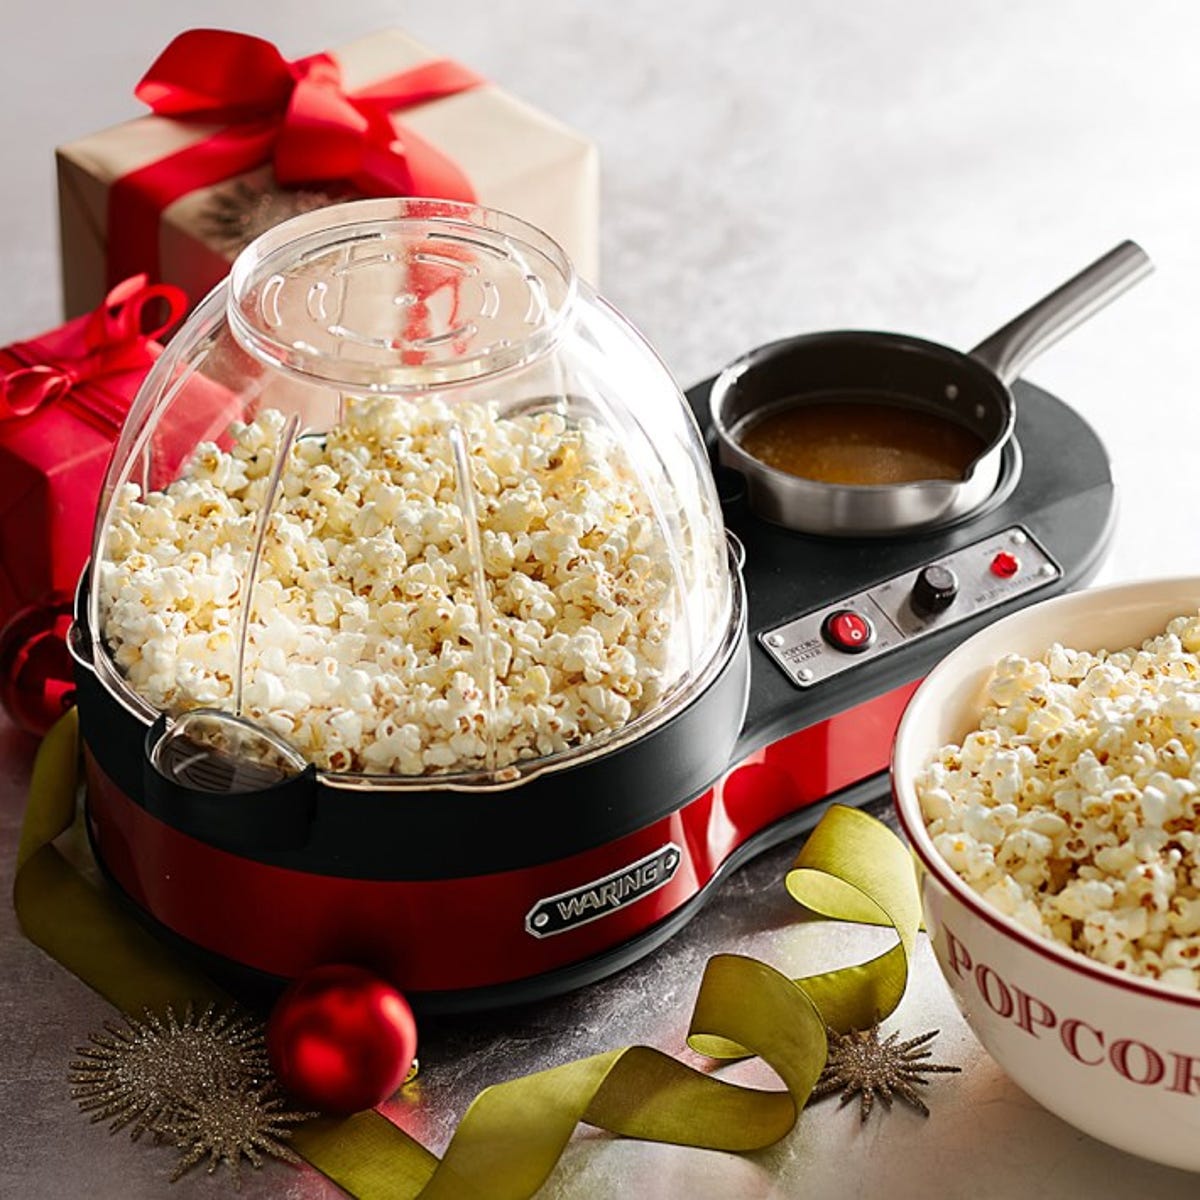 The Waring Popcorn Maker with Melting Pot: Just add chocolate, butter or caramel. Oh, and kernels.